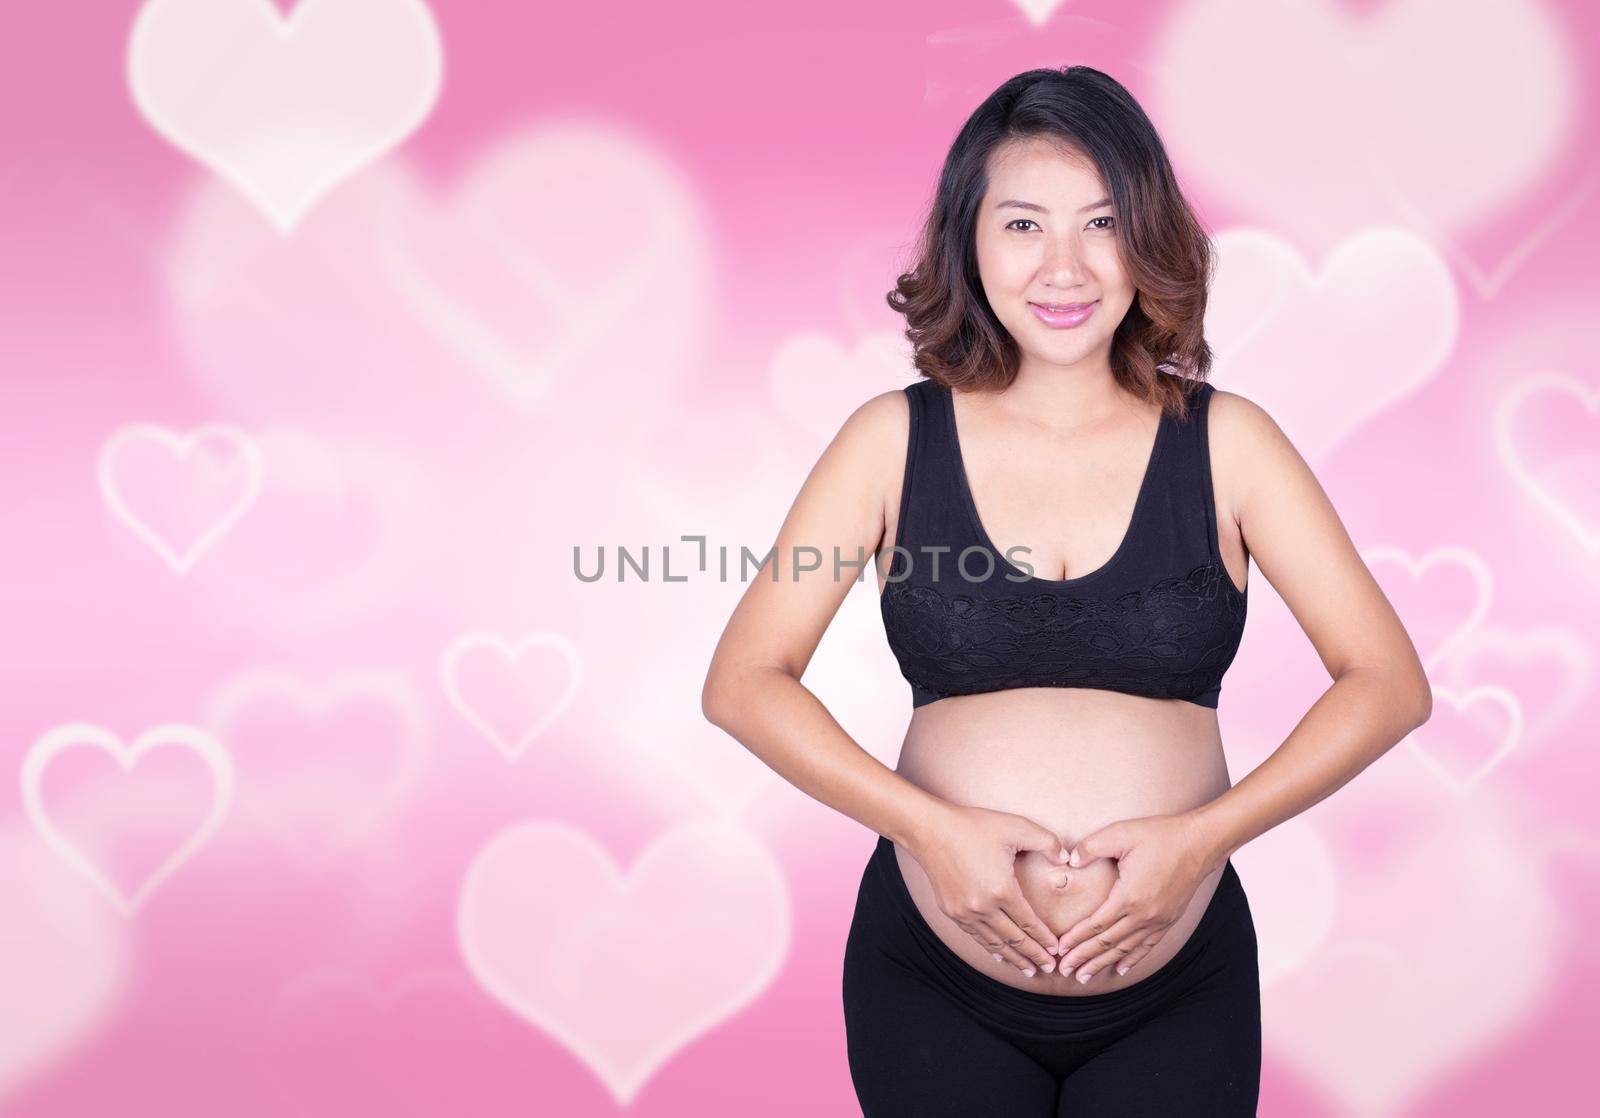 Pregnant Woman holding her hands in a heart shape on belly on heart background by geargodz